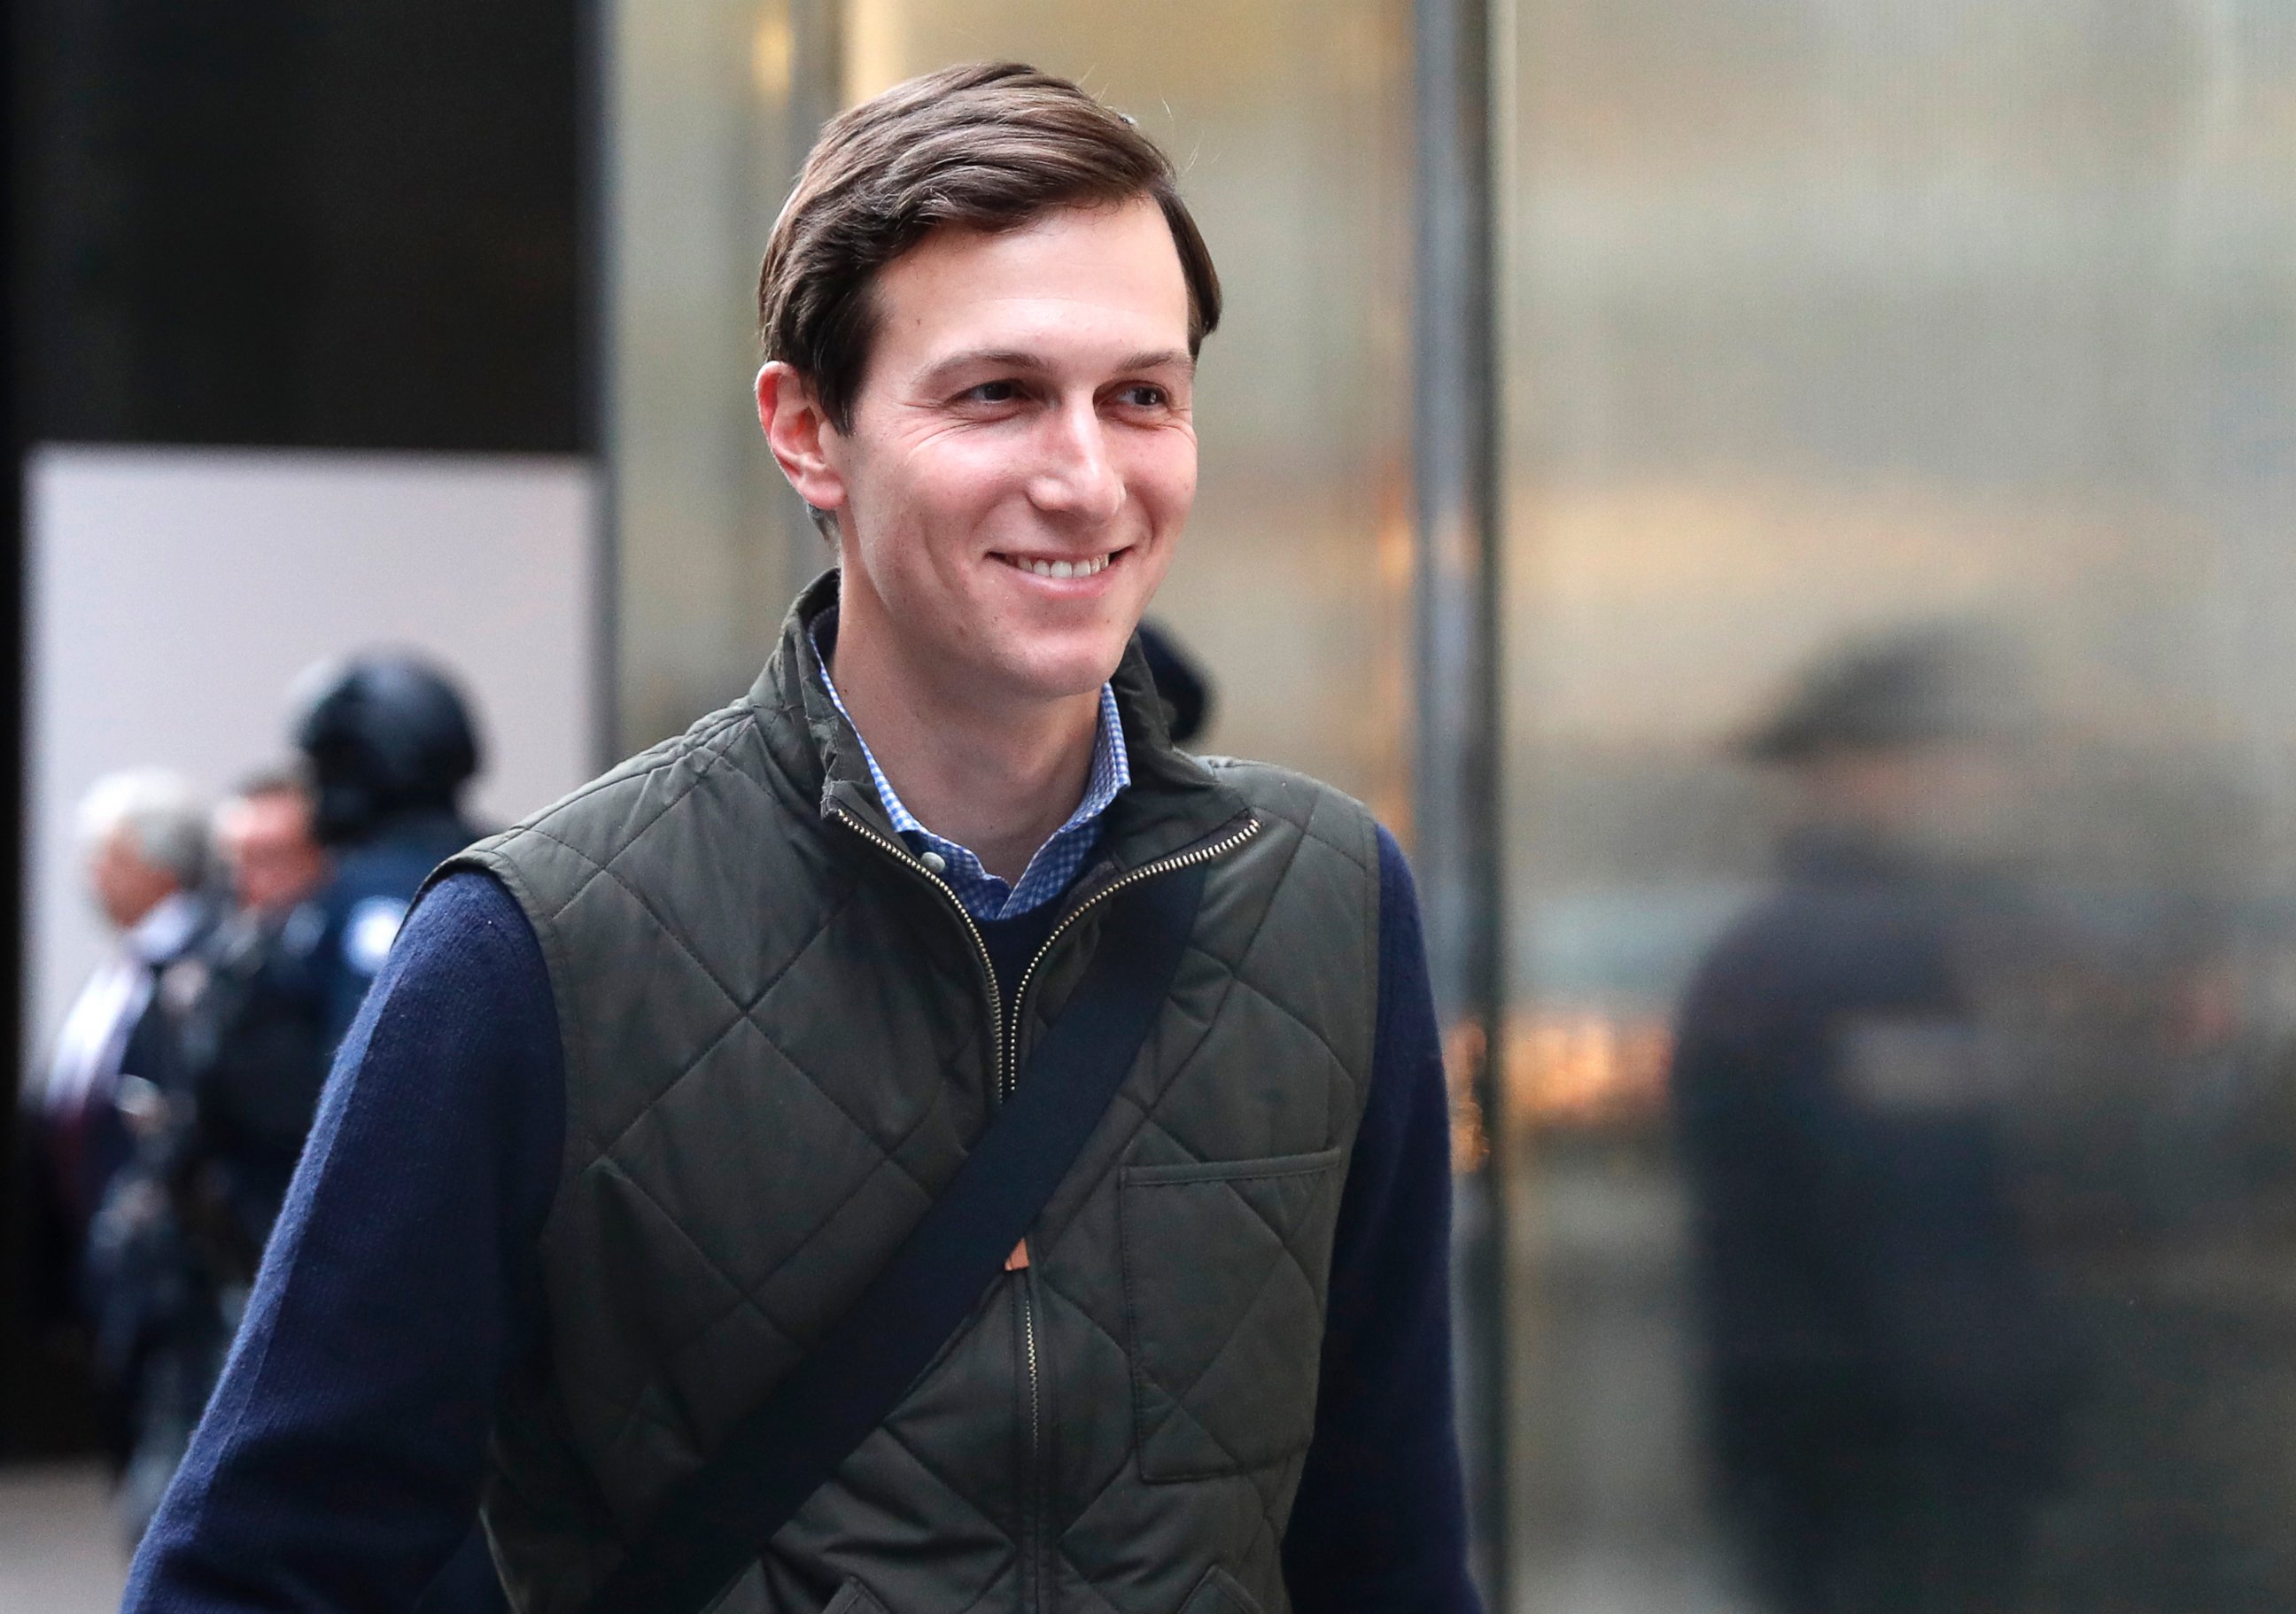 PHOTO: Jared Kushner, son-in-law of of President-elect Donald Trump walks from Trump Tower, in New York City, Nov. 14, 2016.